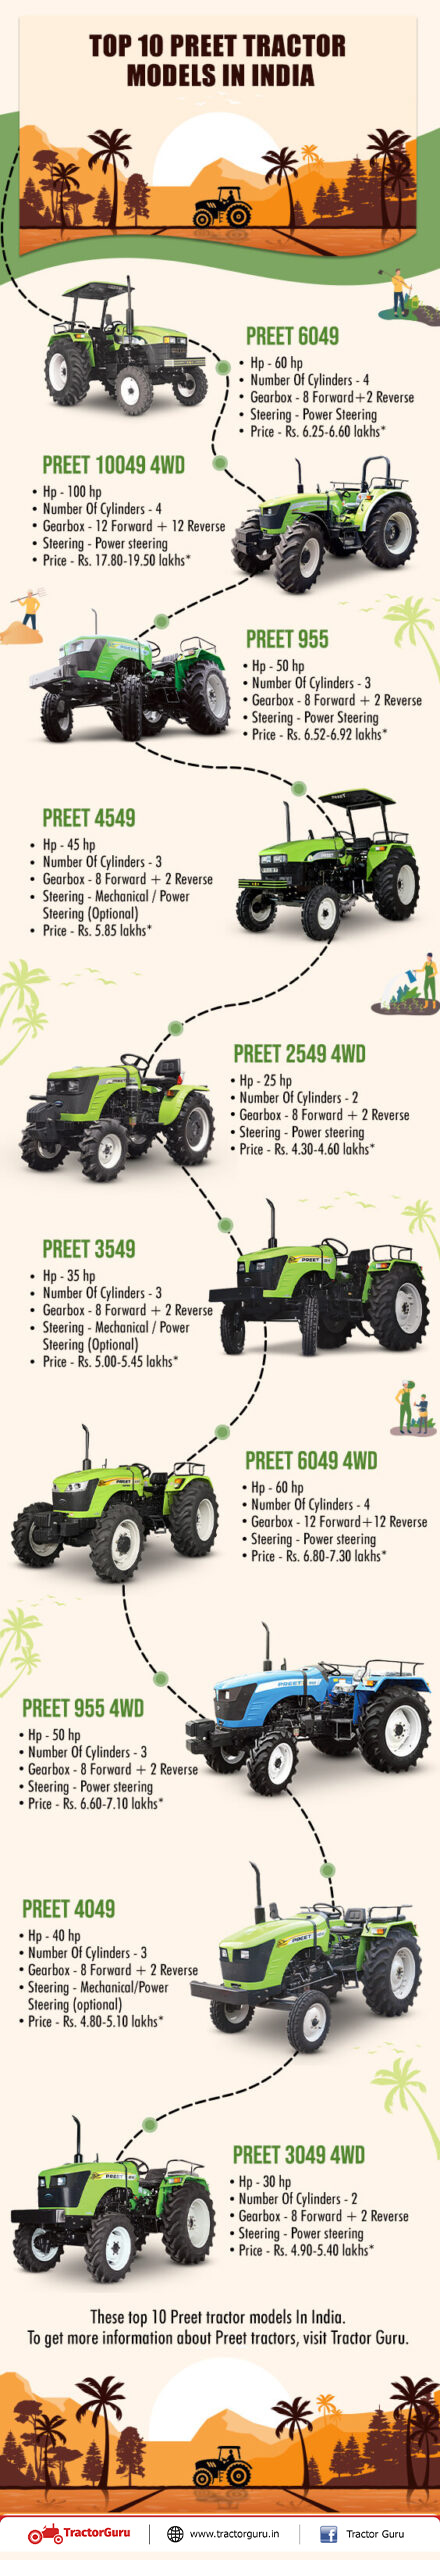 Top 10 Preet tractor models in India